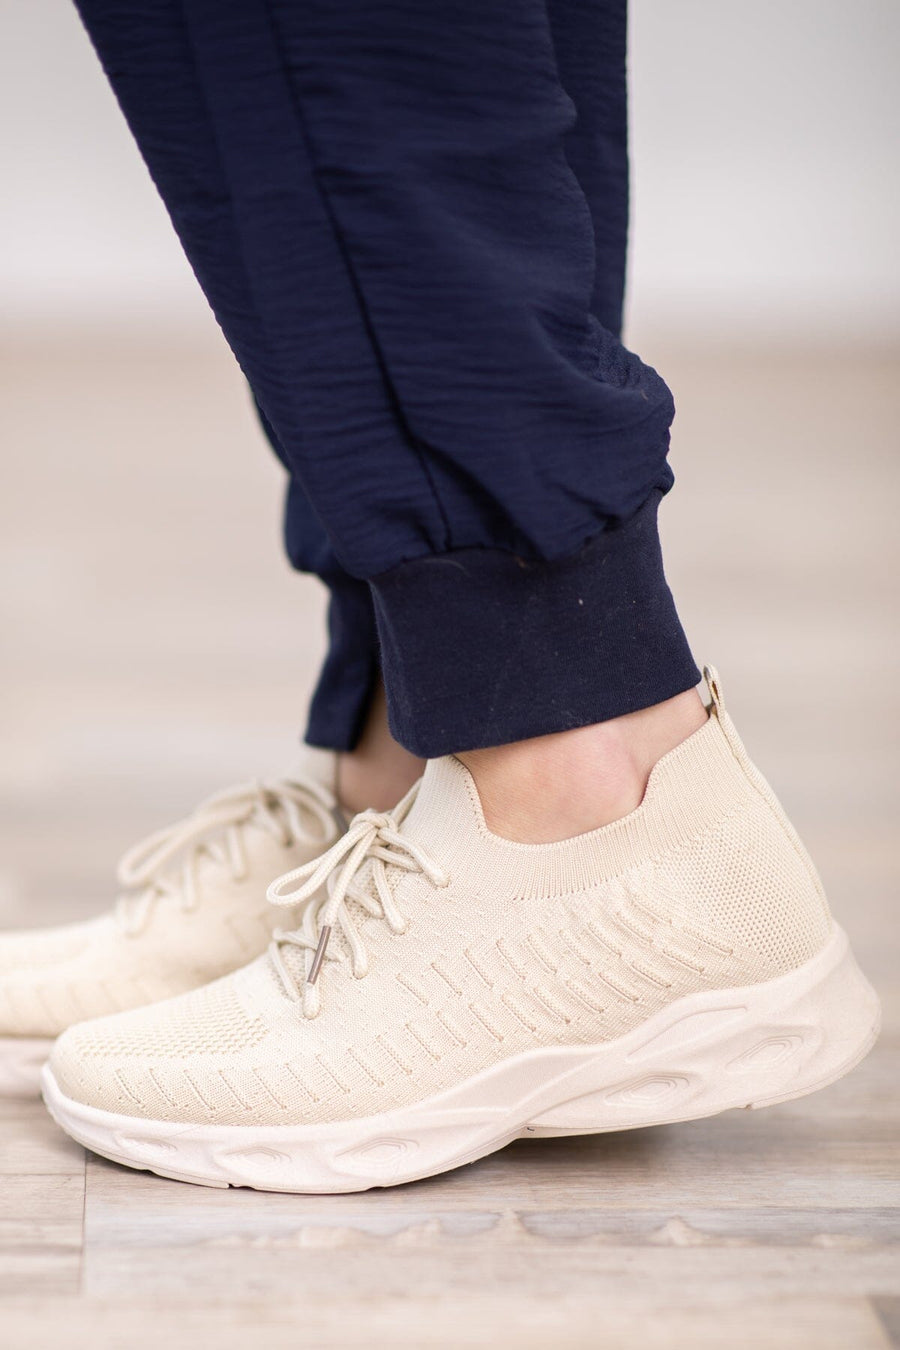 Beige Fly Knit Lace Up Sneakers - Filly Flair